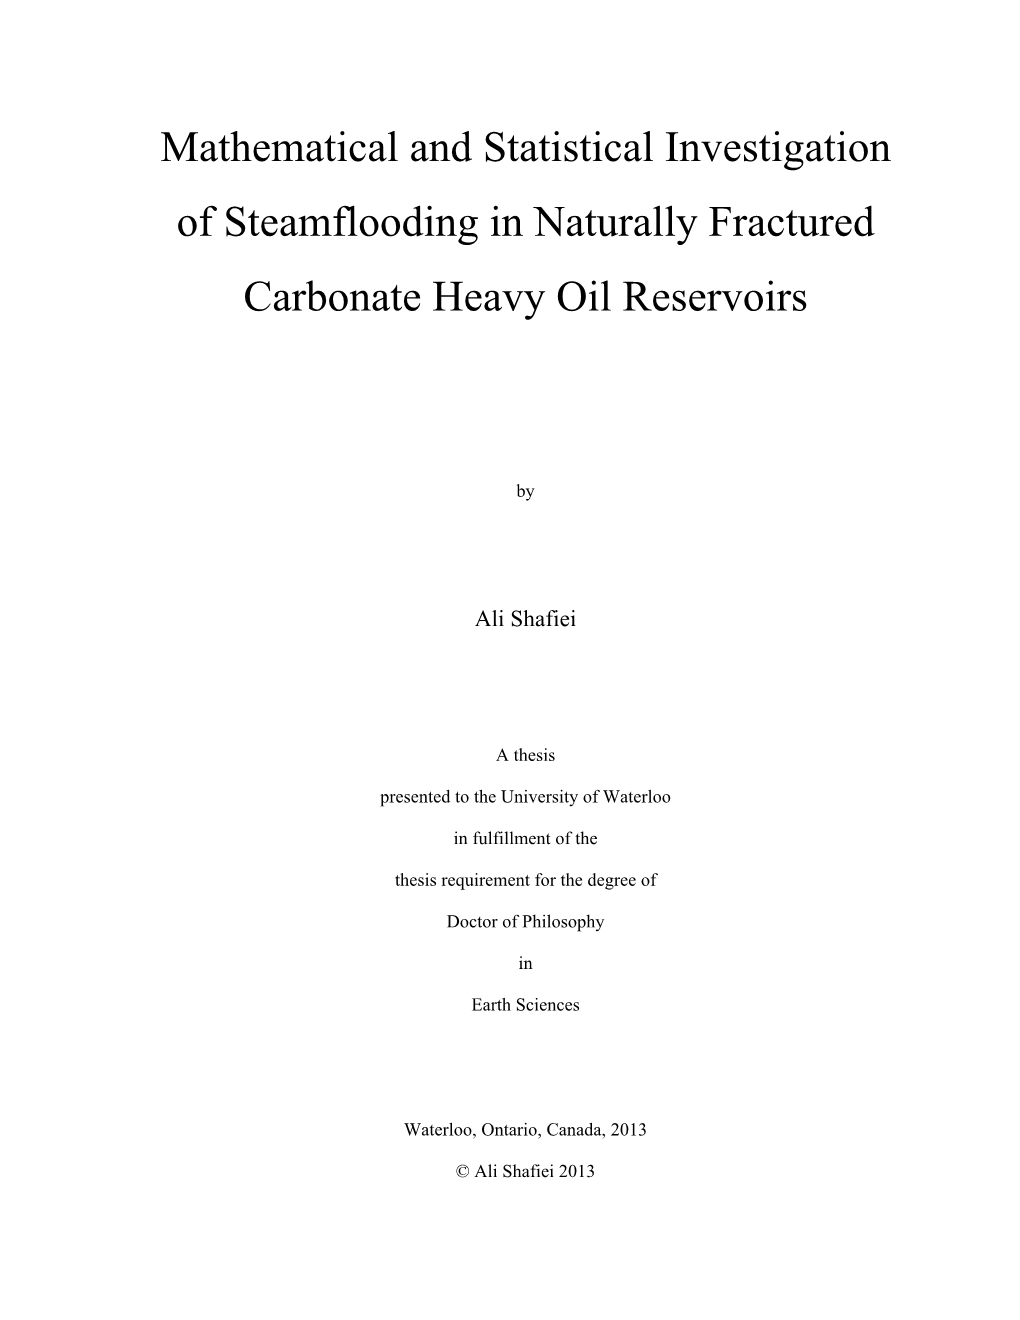 Mathematical and Statistical Investigation of Steamflooding in Naturally Fractured Carbonate Heavy Oil Reservoirs